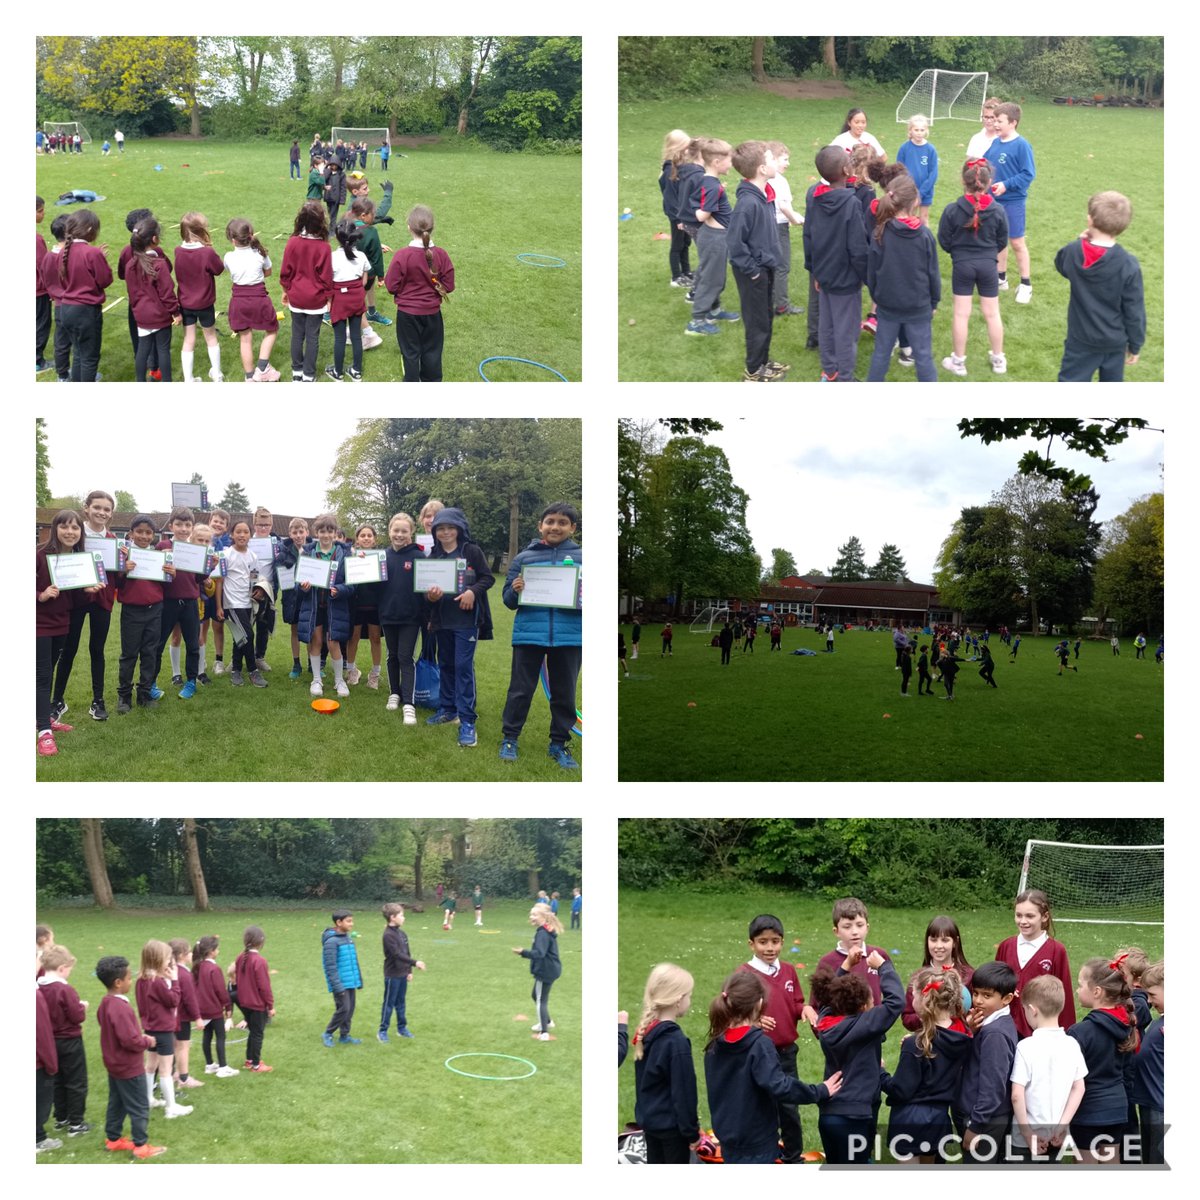 Our first Primary Leadership Academy festival for this year @tyntesfield with their leaders and others from @StAnnesCofE @StMarysSale @woodheysprimary and some very enthusiastic Year 2s. Great to see how the young leaders are gaining confidence delivering activity 👏#Learn2Lead